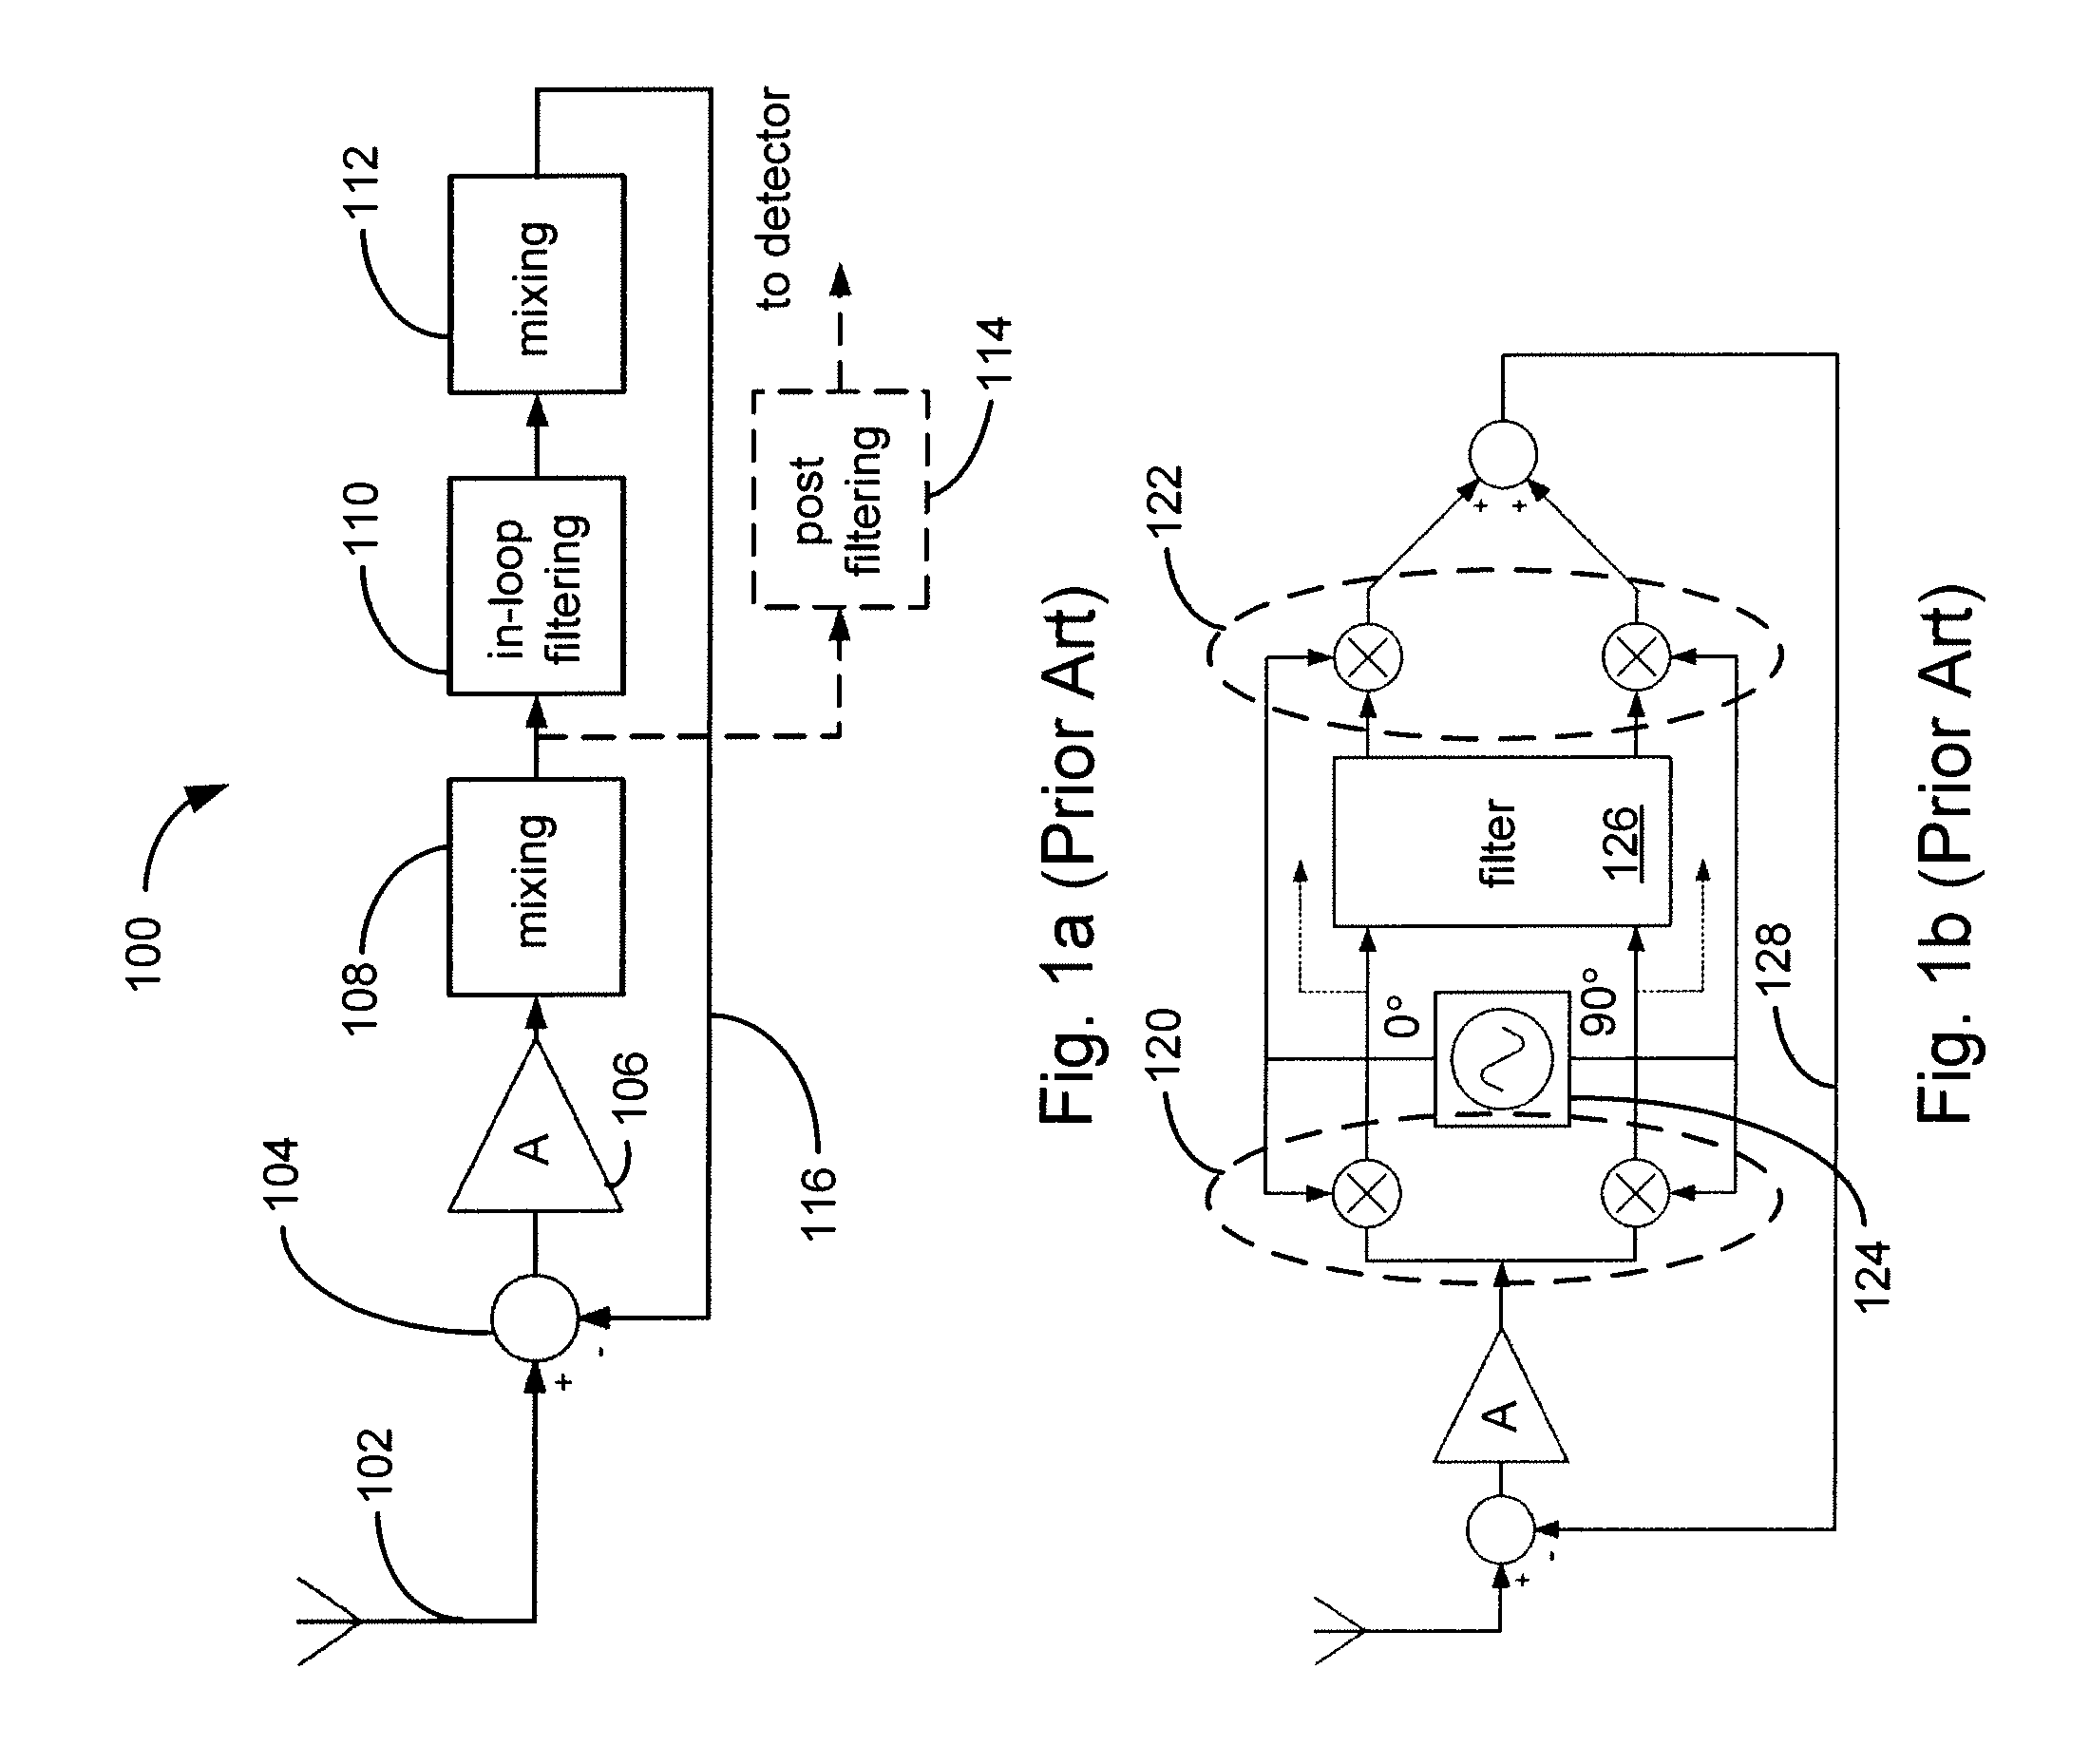 System and method for active diplexers